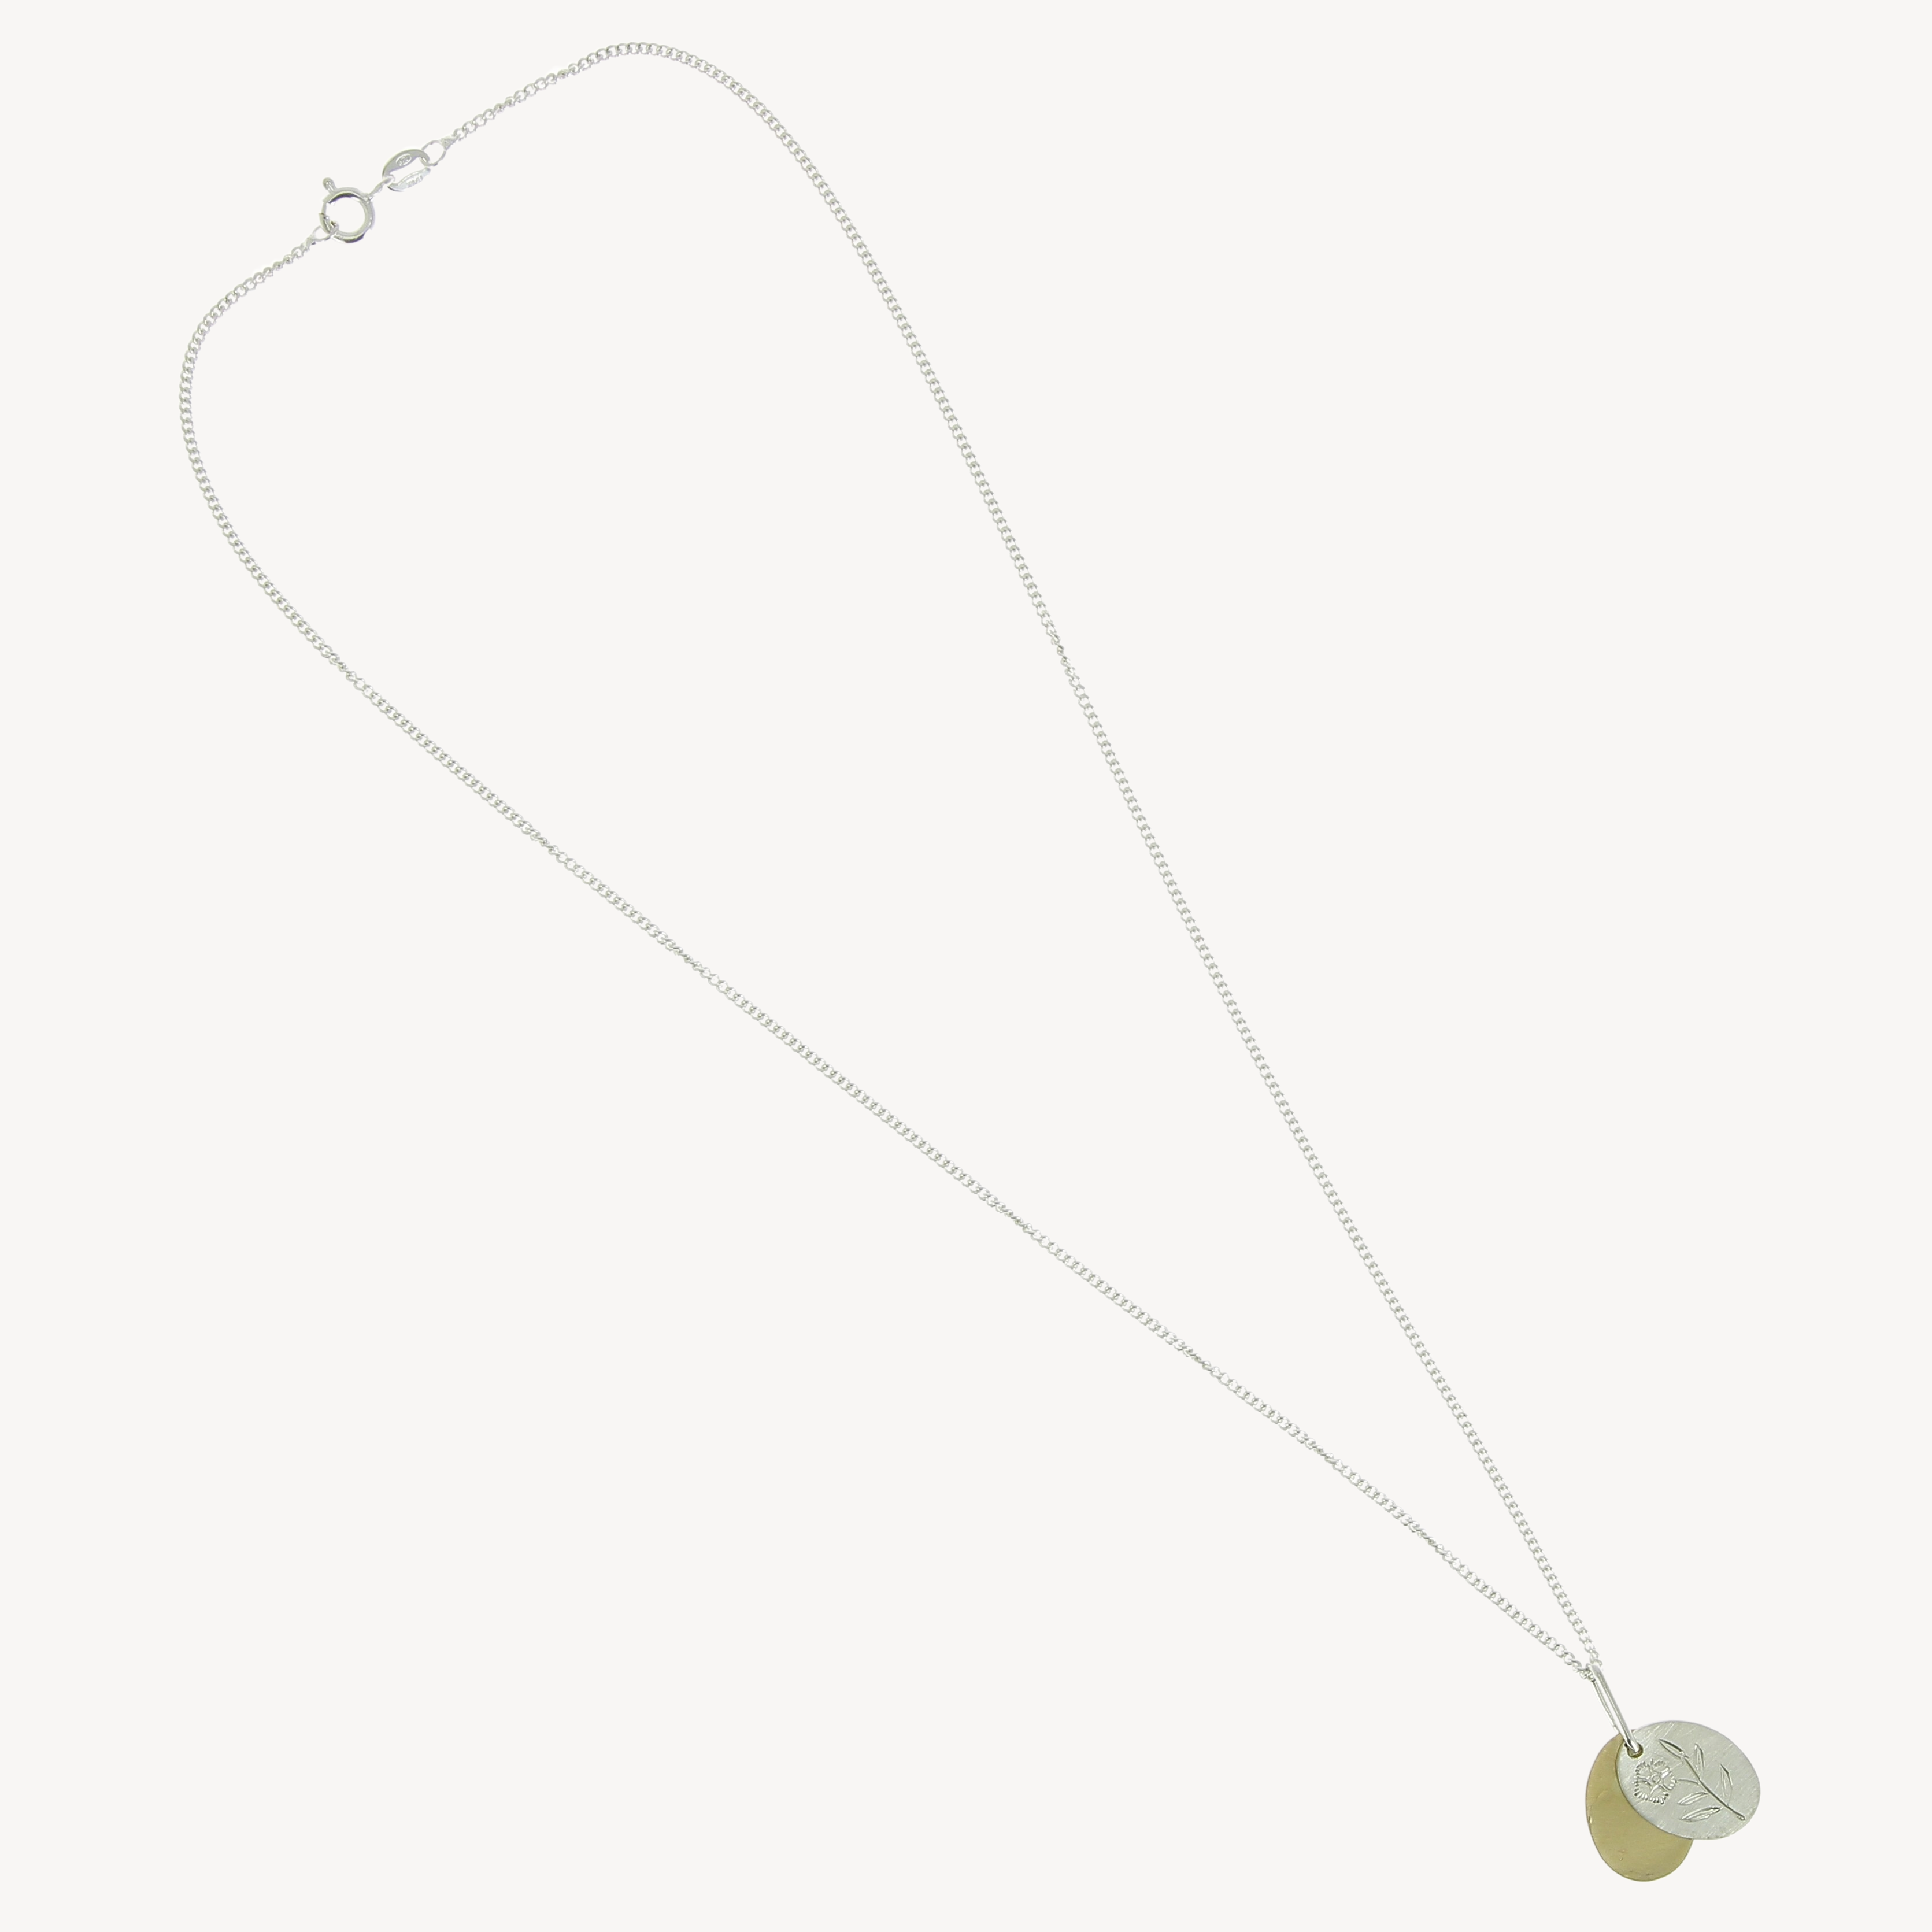 Rose with gold tags necklace